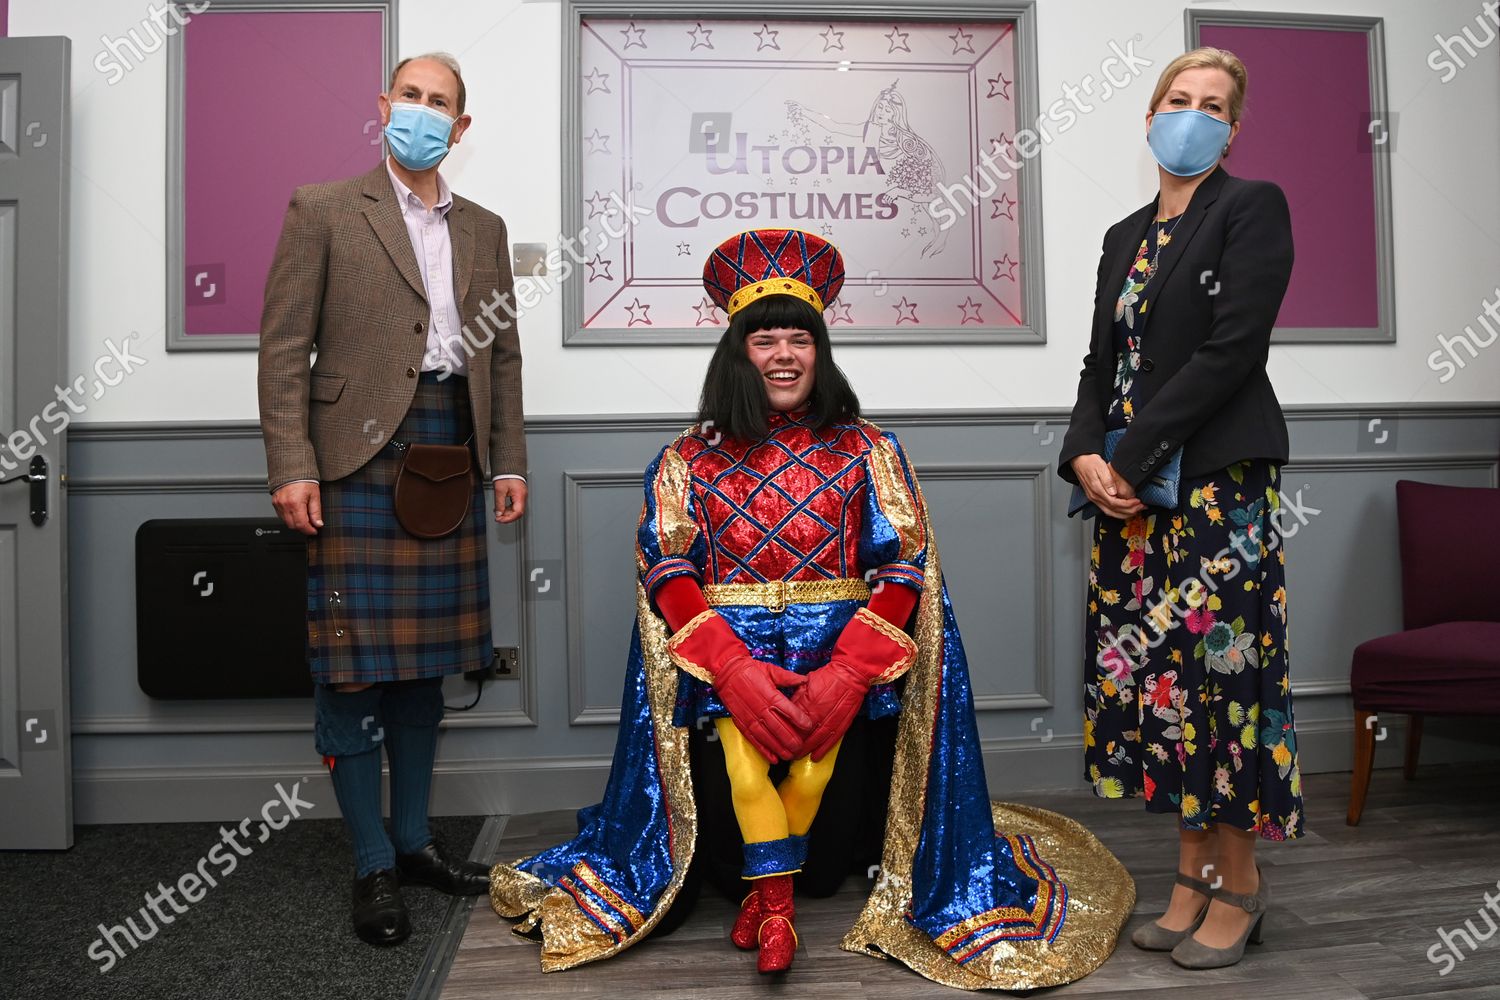 prince-edward-and-sophie-countess-of-wessex-visit-to-utopia-costumes-forfar-scotland-uk-shutterstock-editorial-12172309ay.jpg